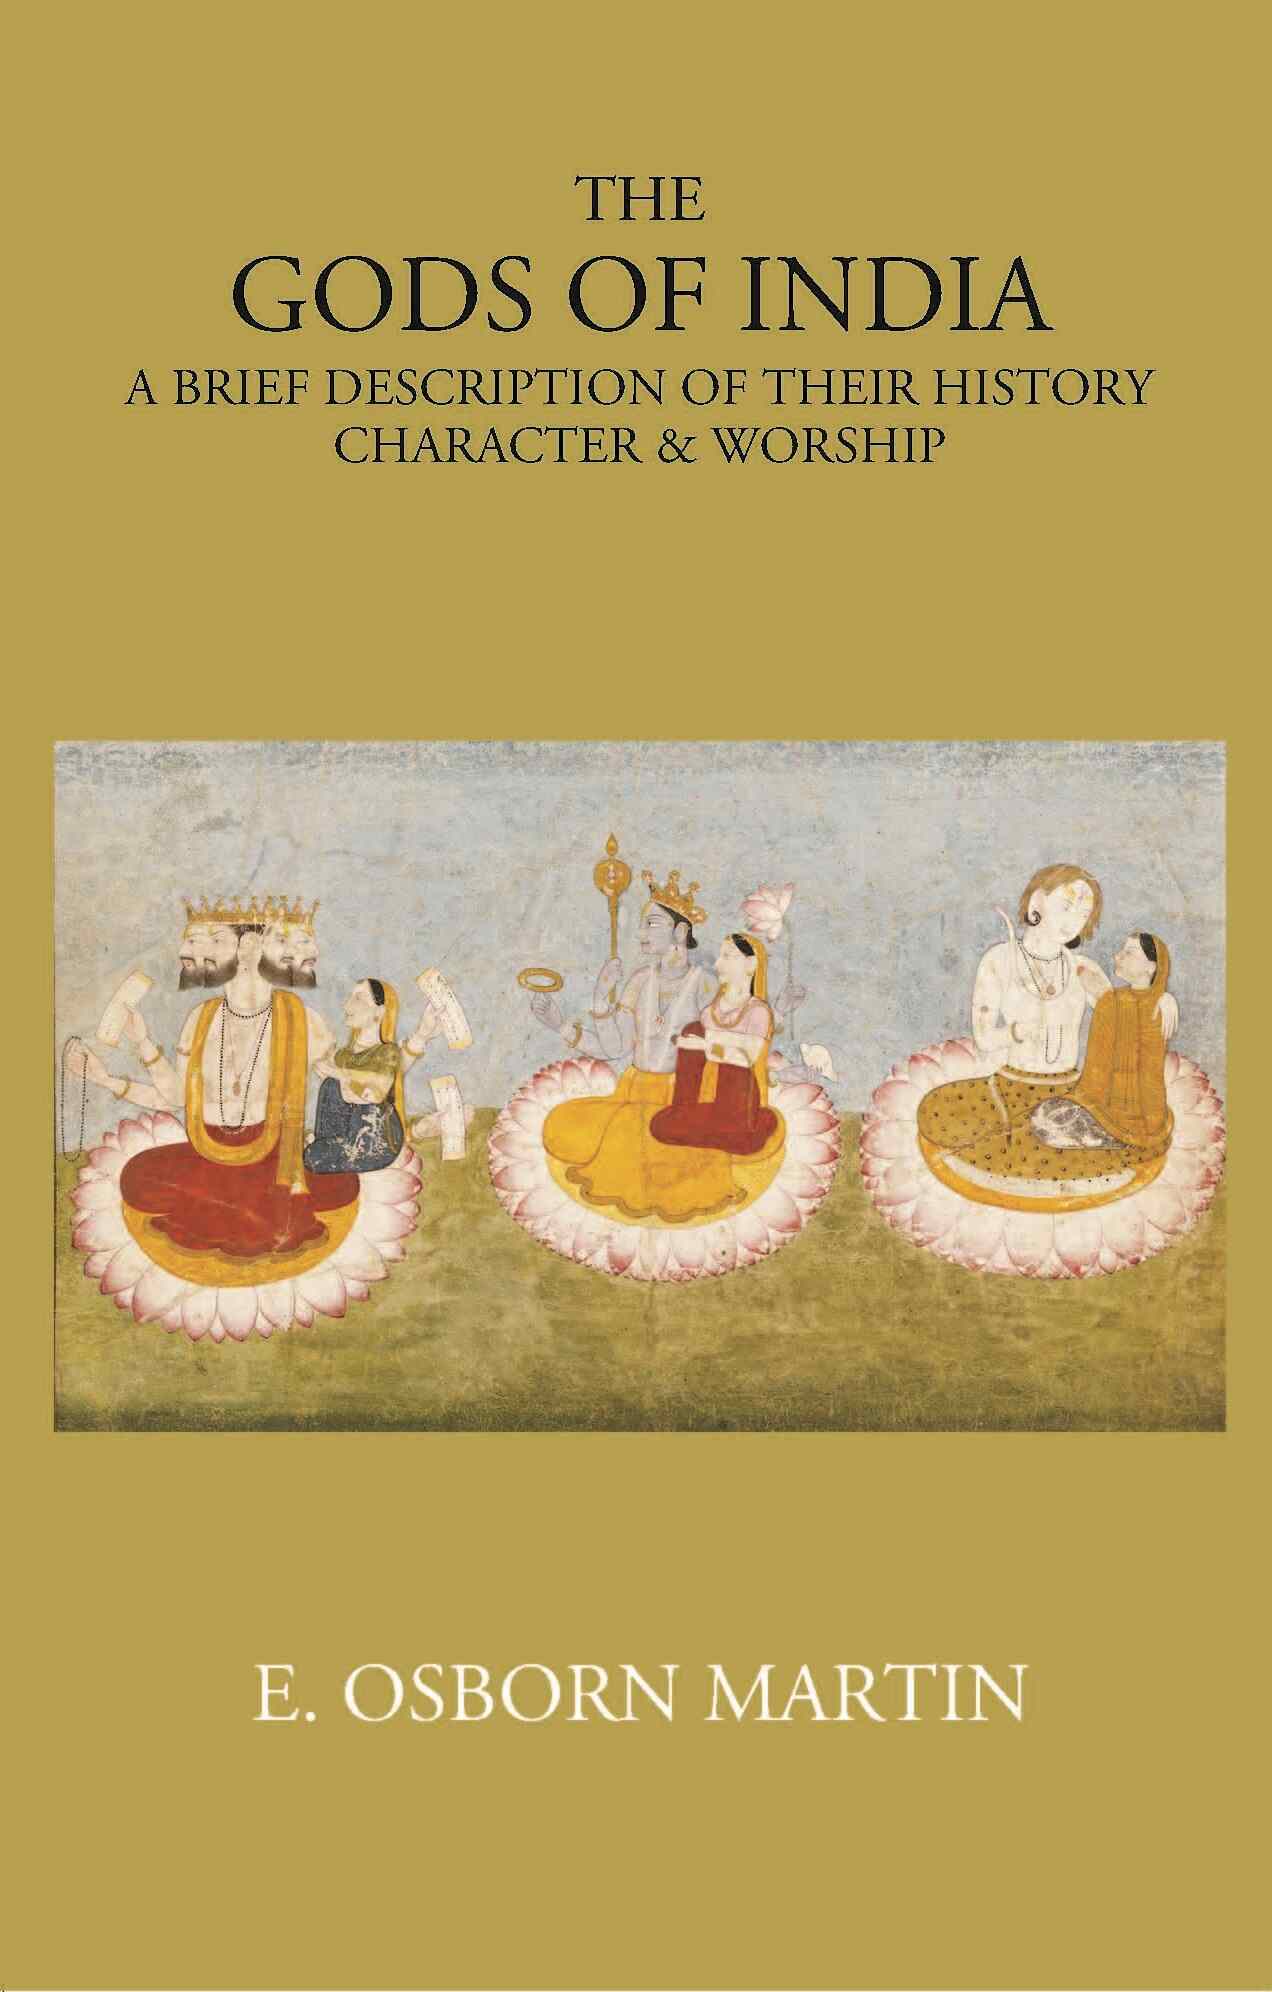 THE GODS OF INDIA: A BRIEF DESCRIPTION OF THEIR HISTORY, CHARACTER & WORSHIP 